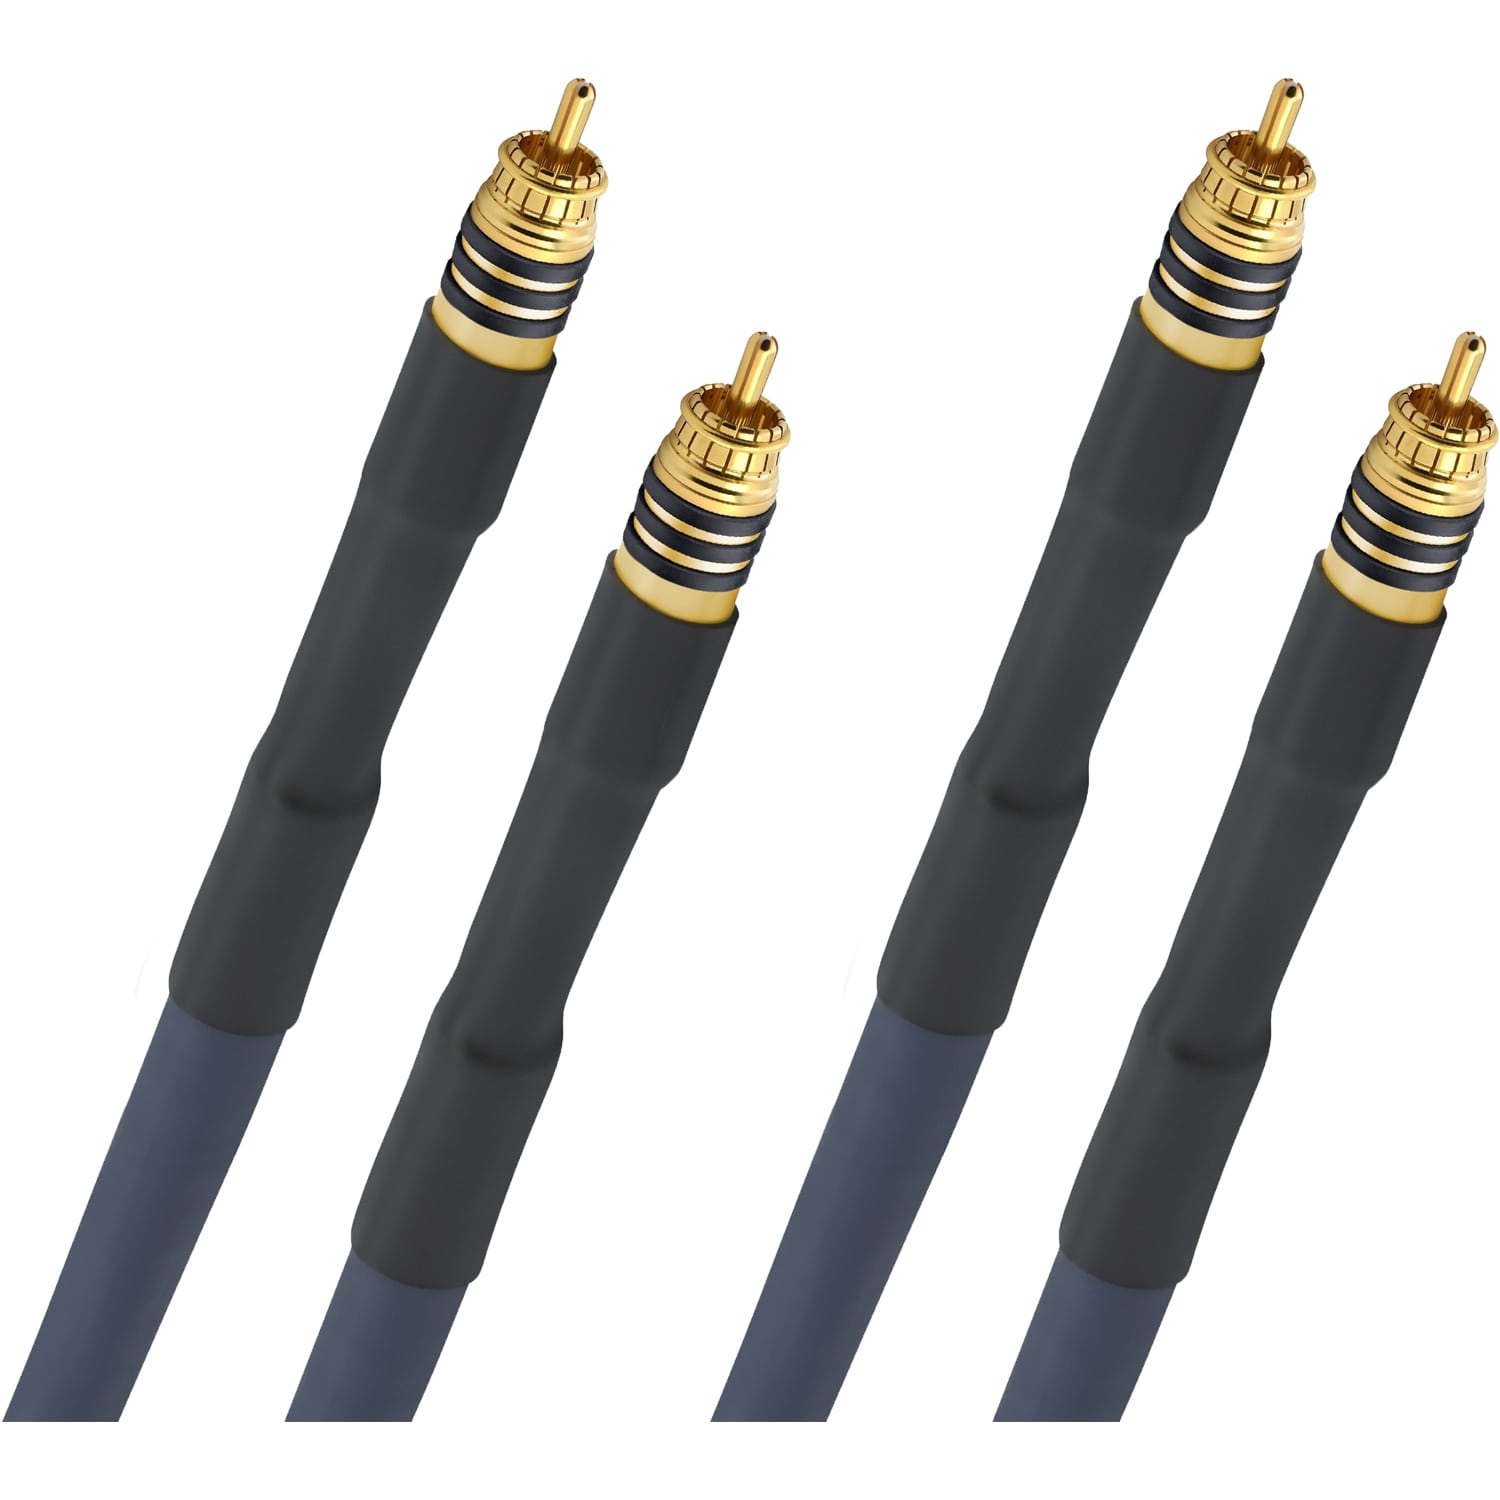 Кабели межблочные аудио Oehlbach STATE OF THE ART XXL Cable RCA, 2x2,00m, gold, D1C13116 силовые кабели oehlbach state of the art xxl powercord 1 5m d1c13061